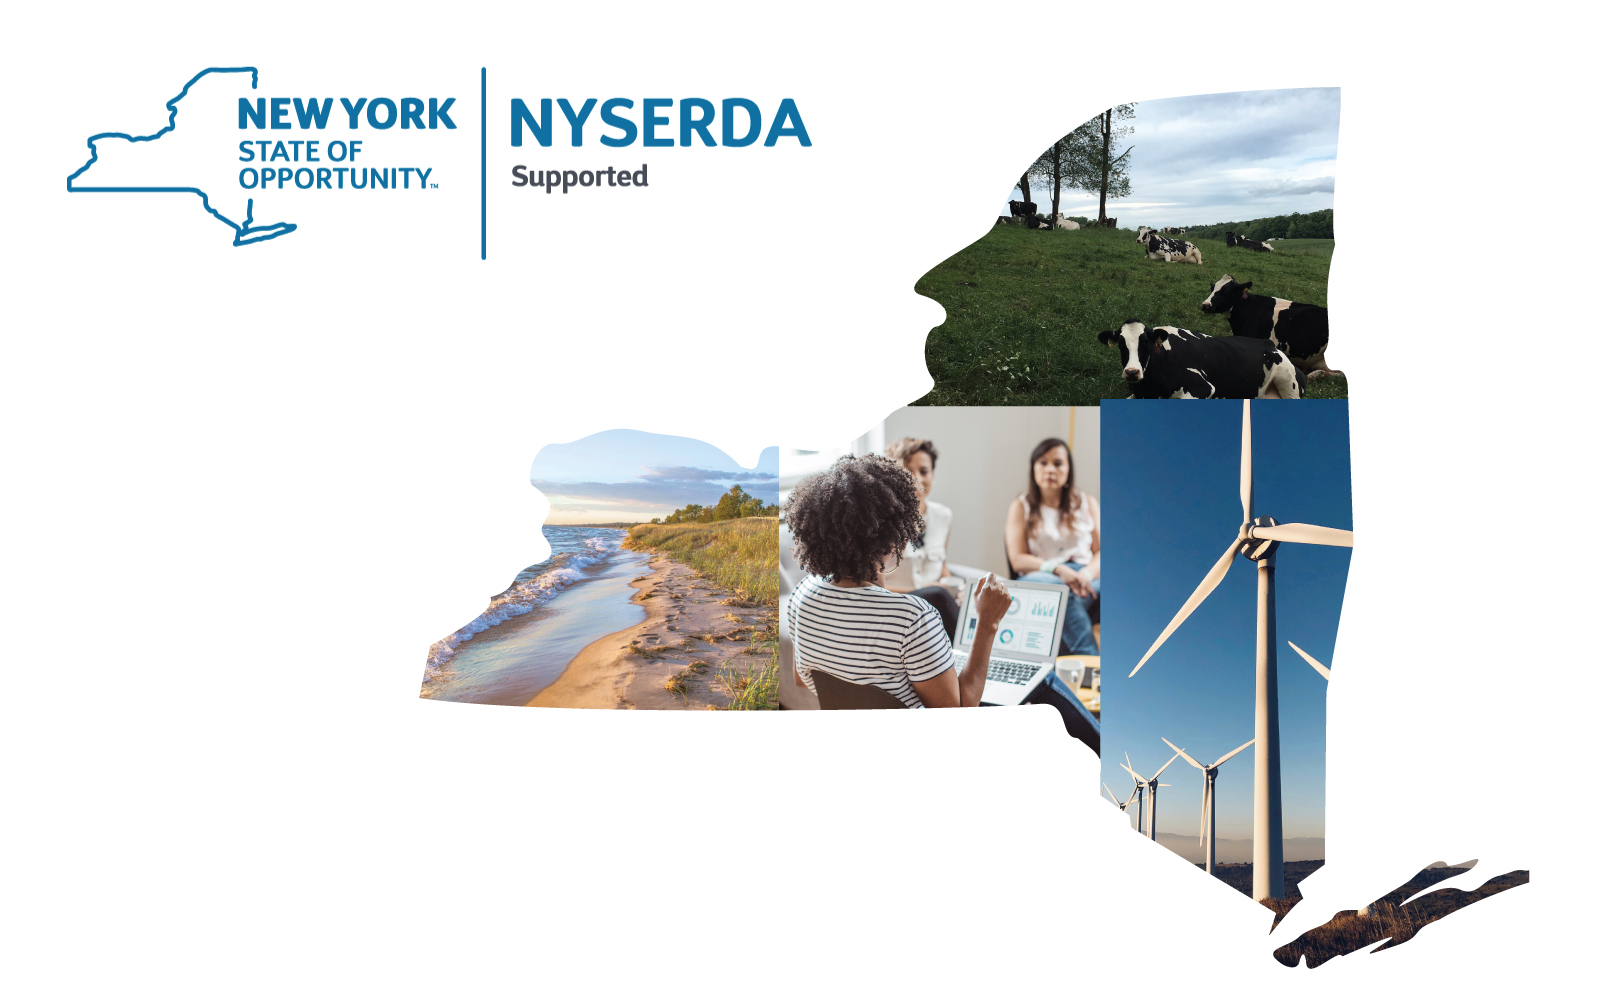 NYSERDA logo and collage of climate-related images in shape of New York State